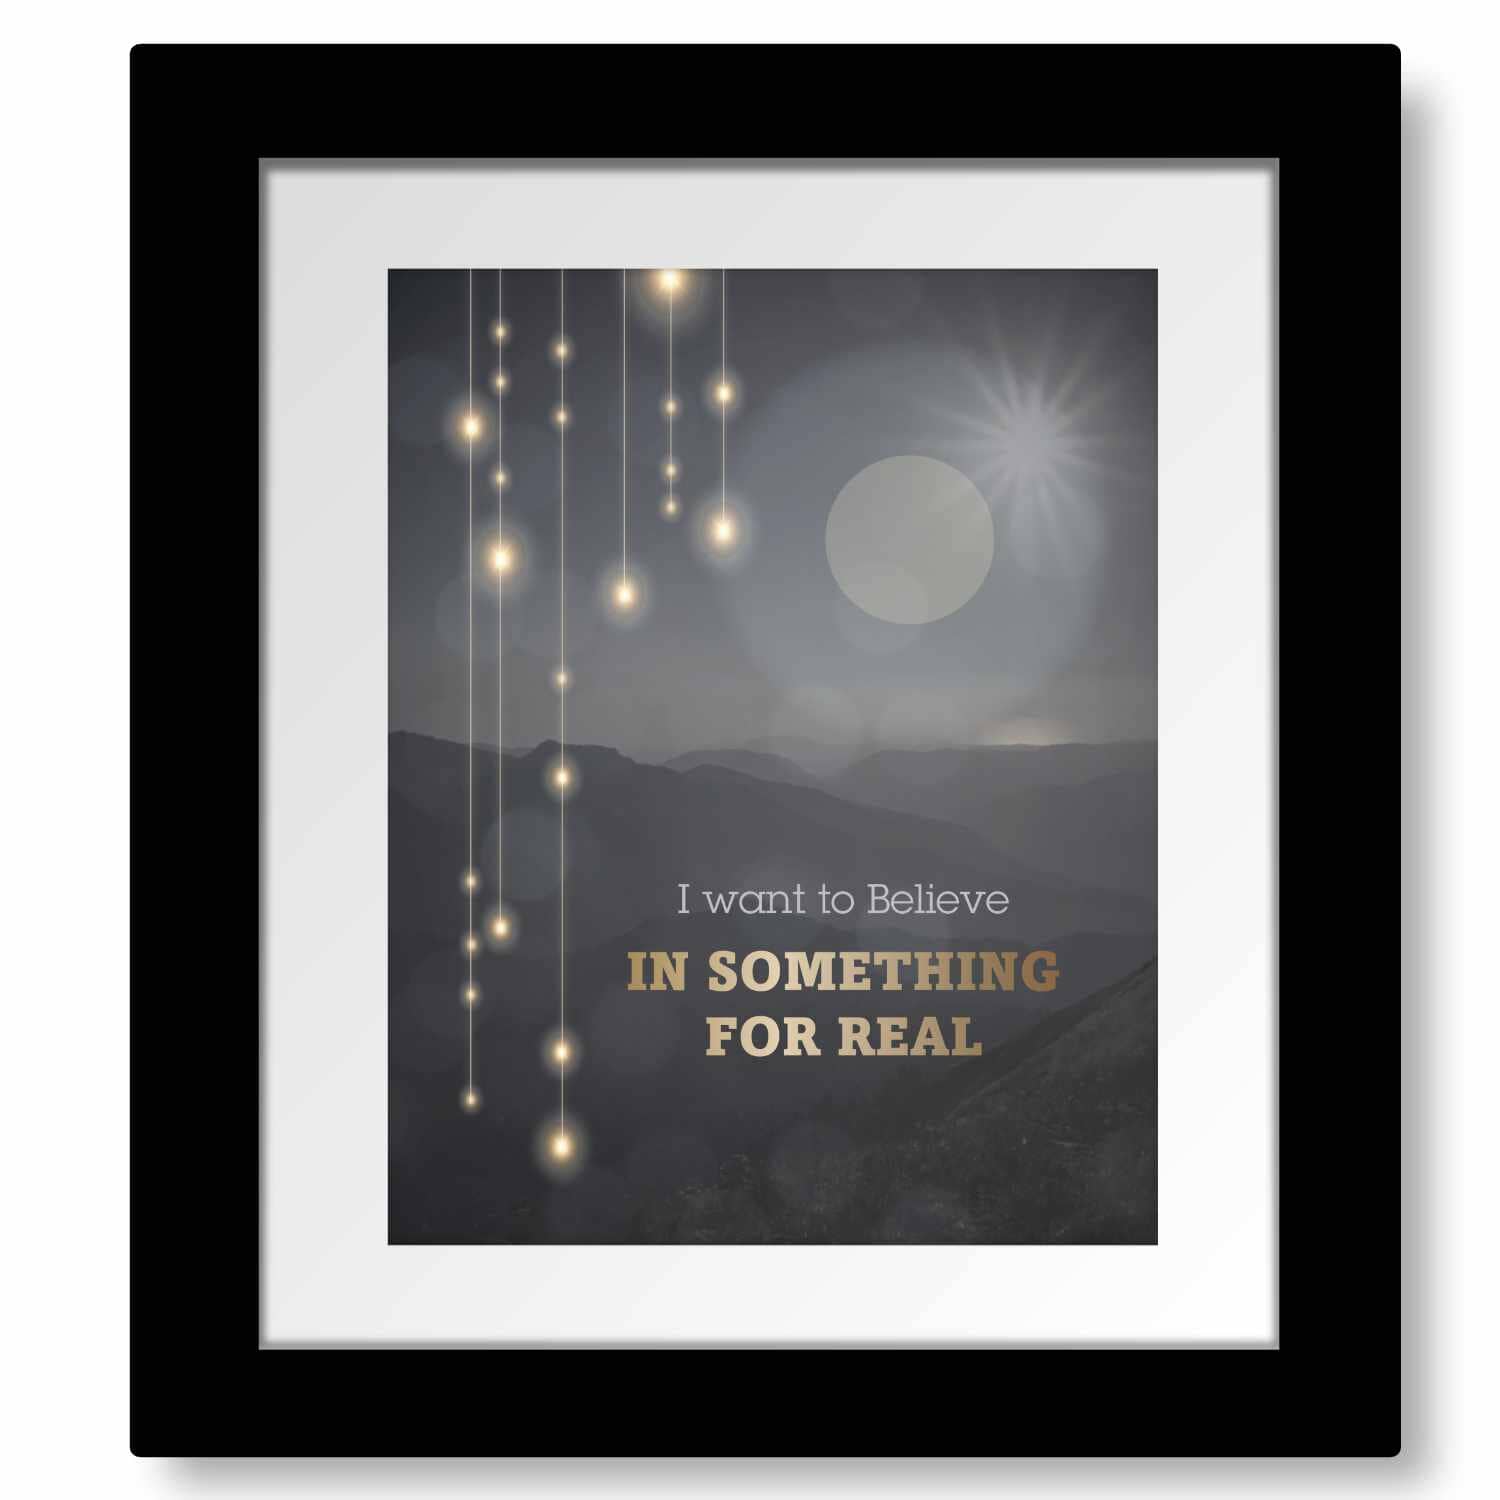 I Want to Believe by Sass Jordan - 80s Music Lyric Art Print Song Lyrics Art Song Lyrics Art 8x10 Matted and Framed Print 